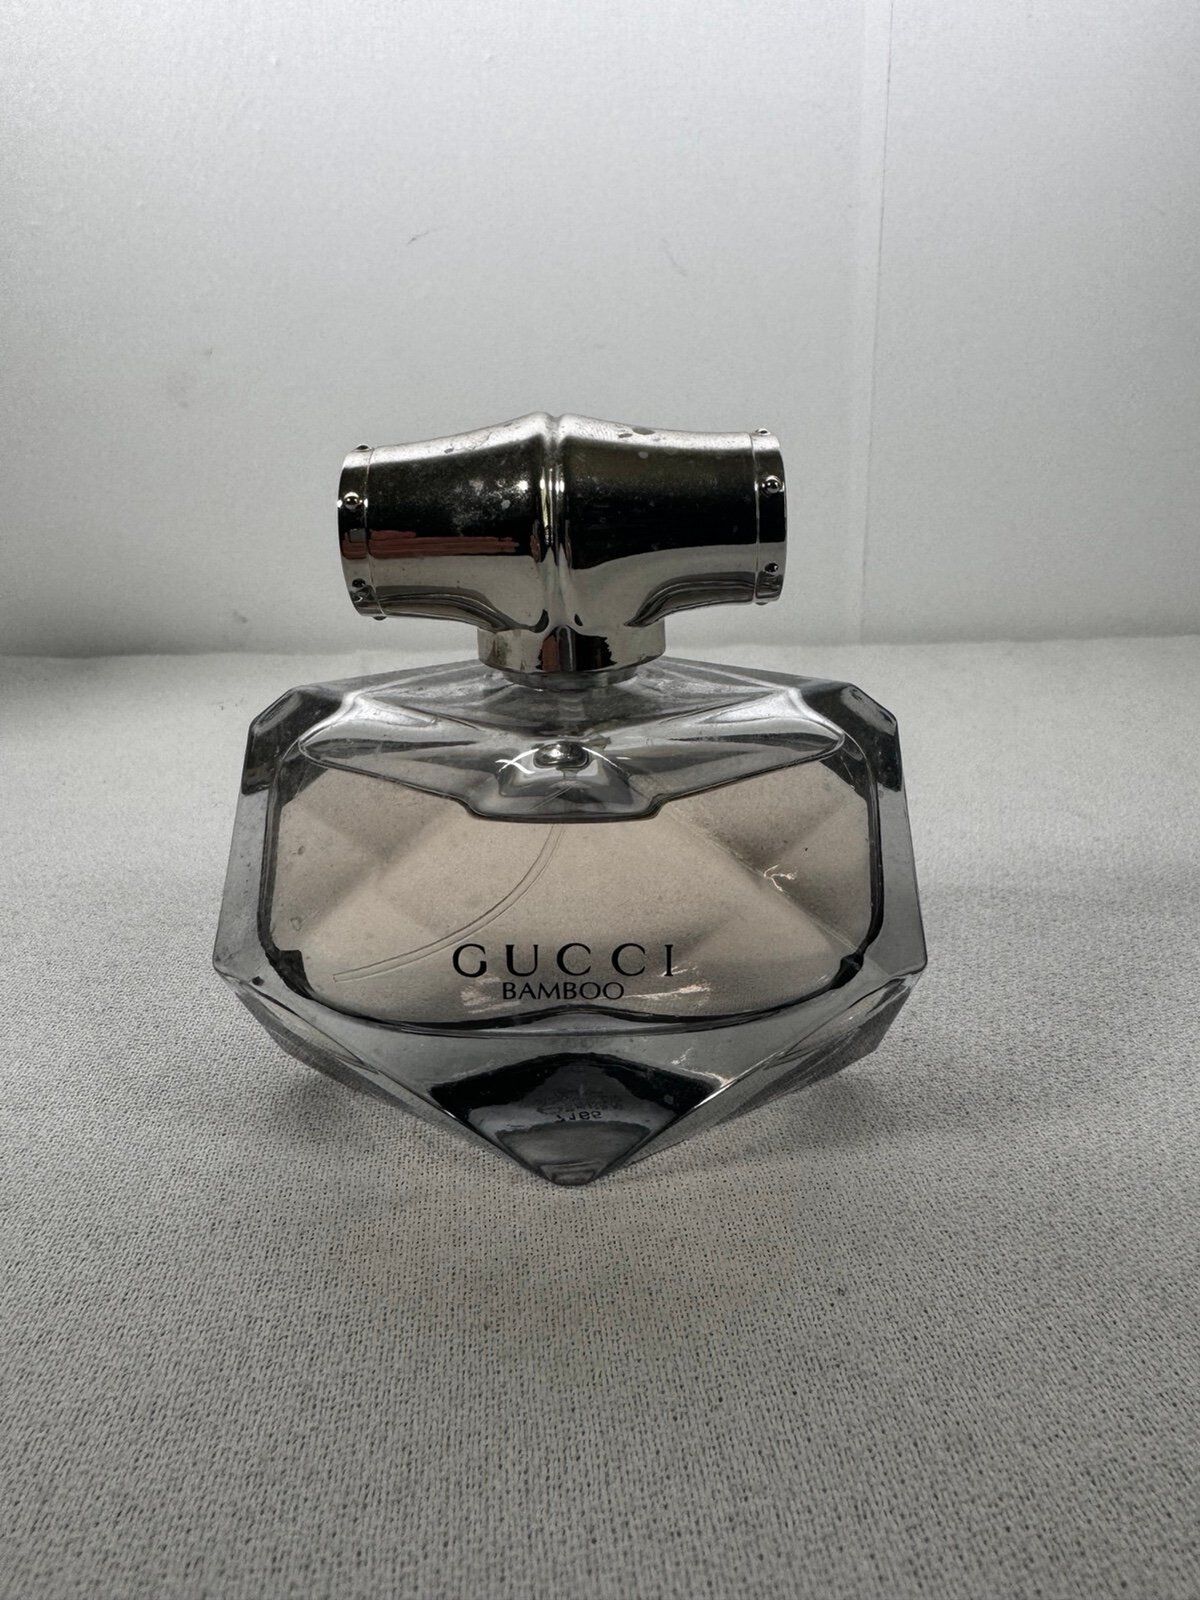 Gucci Bamboo by Gucci Perfume Womens 2.5 Oz. Full Size